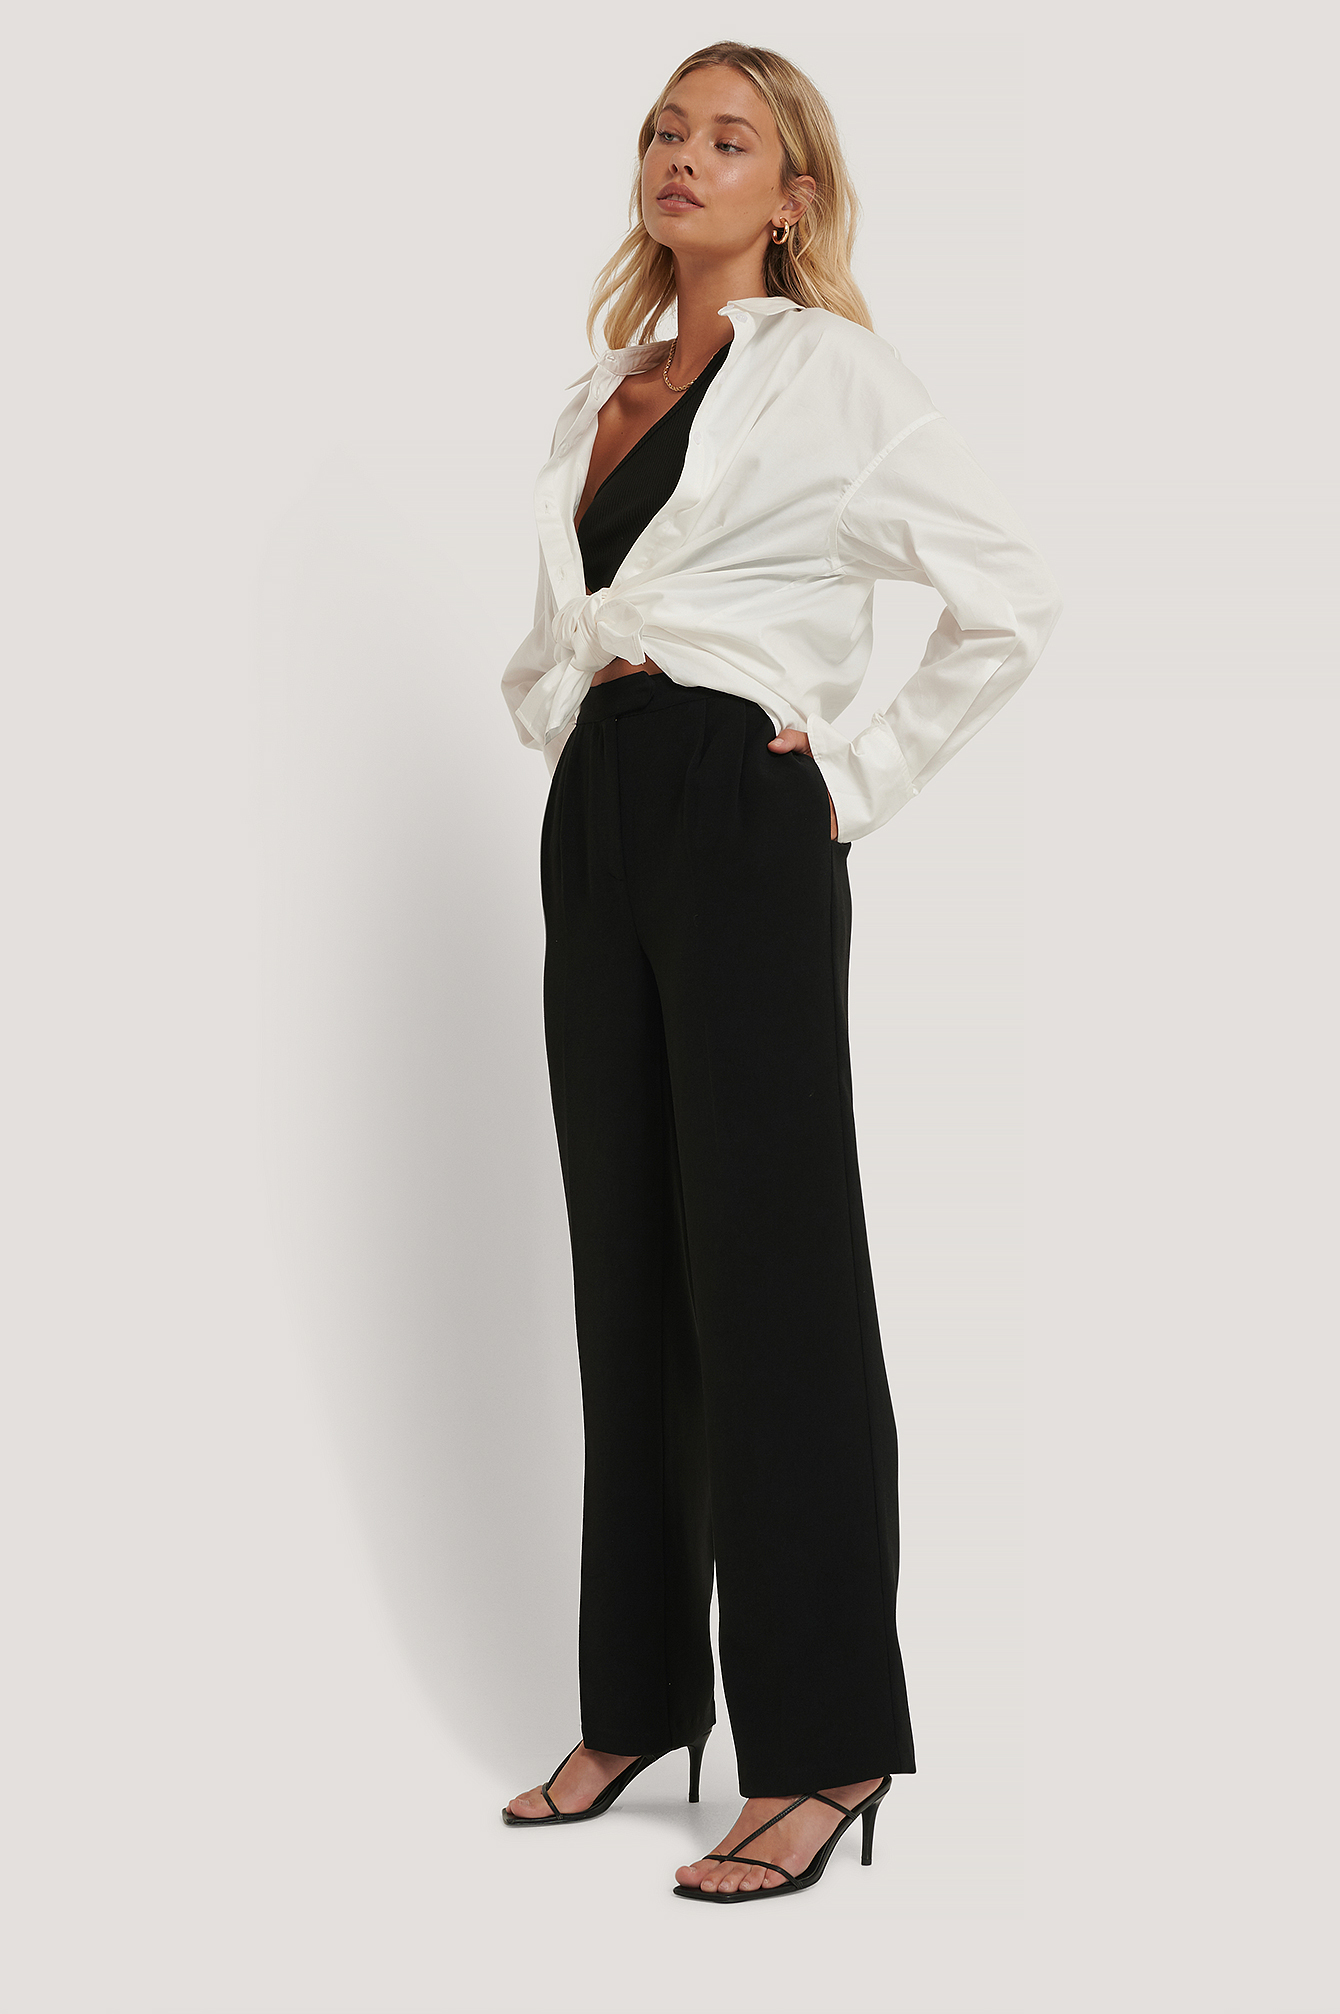 Buy Black Trousers & Pants for Women by Marks & Spencer Online | Ajio.com